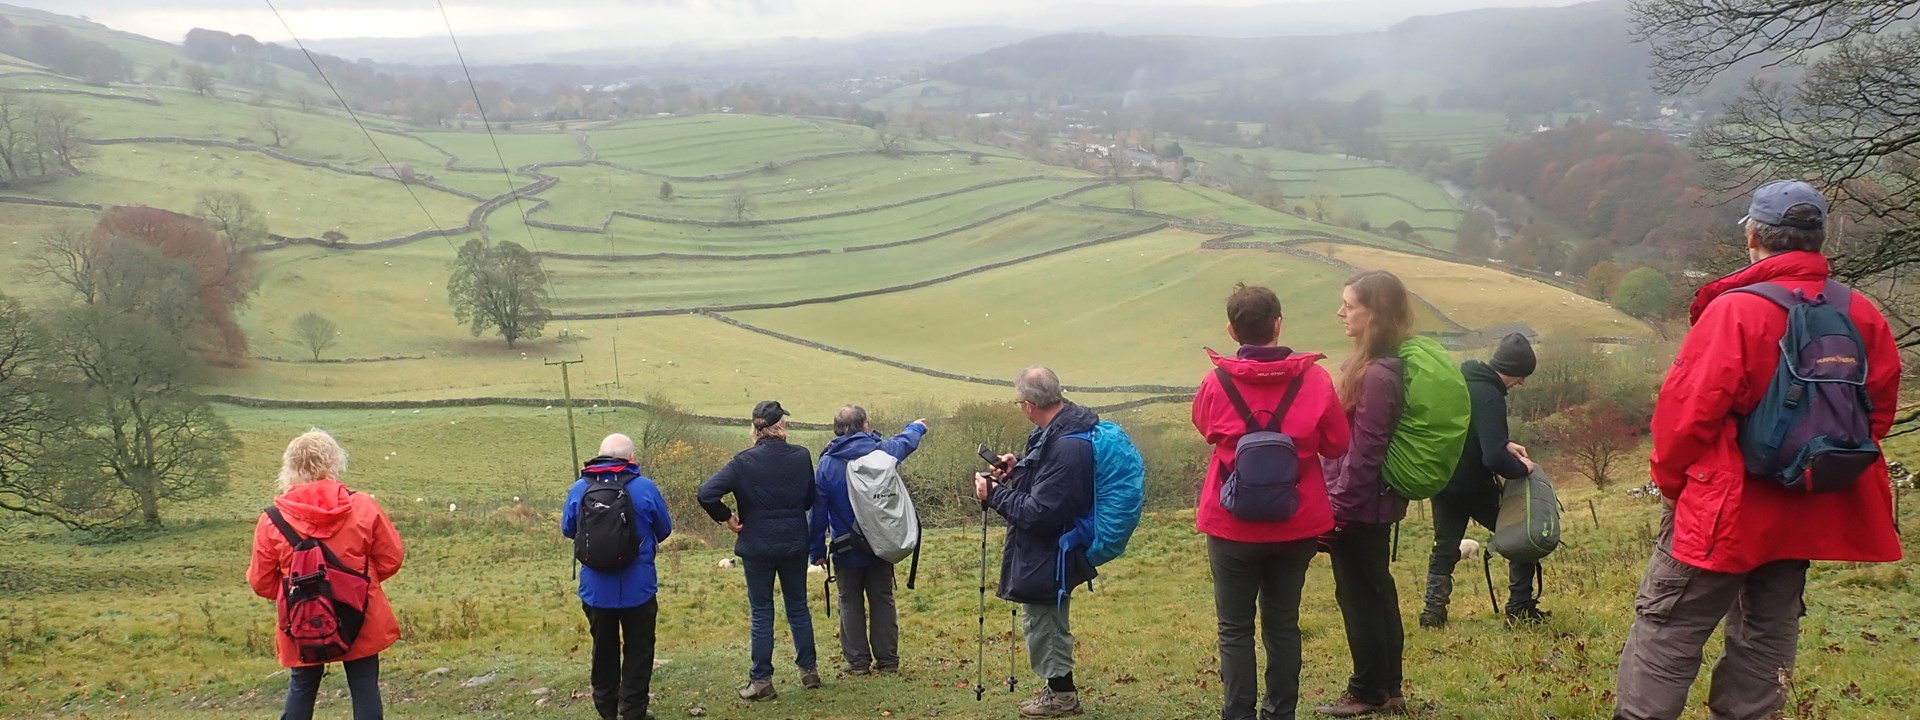 Walkers view the Yorkshire Dales